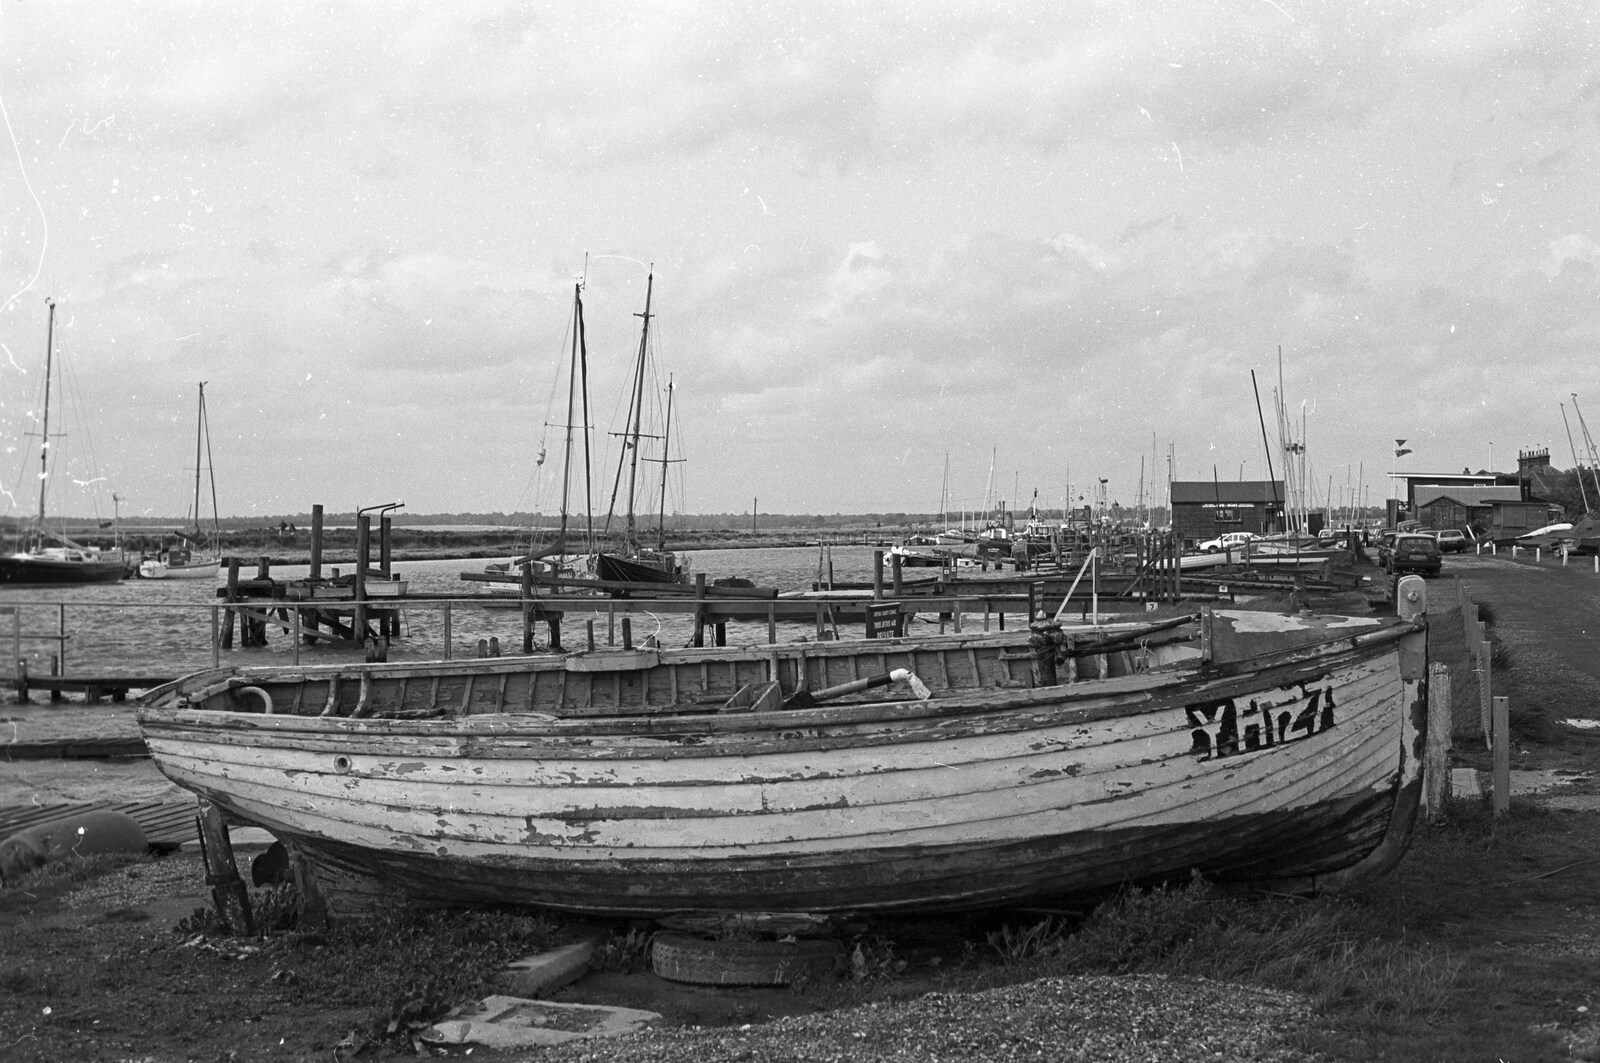 Blackshore Quay in Black and White, Southwold and Sizewell, Suffolk - 16th September 1992: The decaying skeleton of a fishing boat